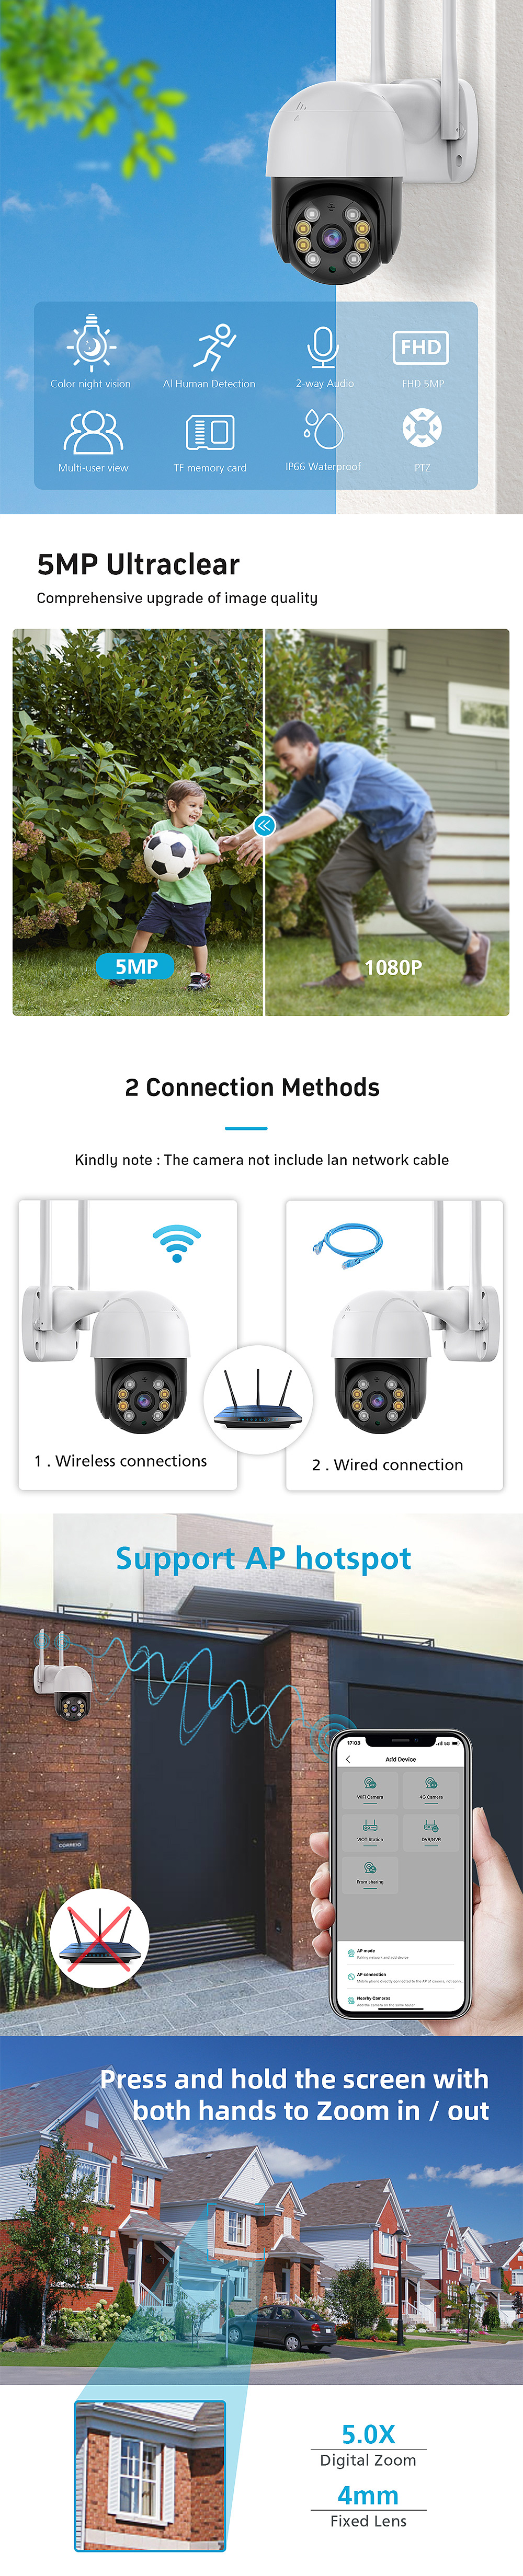 1080P PTZ Wifi IP Camera Outdoor Wireless PTZ Surveillance Security Video Cam Intelligent Two-Way Audio Night Vision Remote APP Monitoring Notifications Push Camera for Home Safety